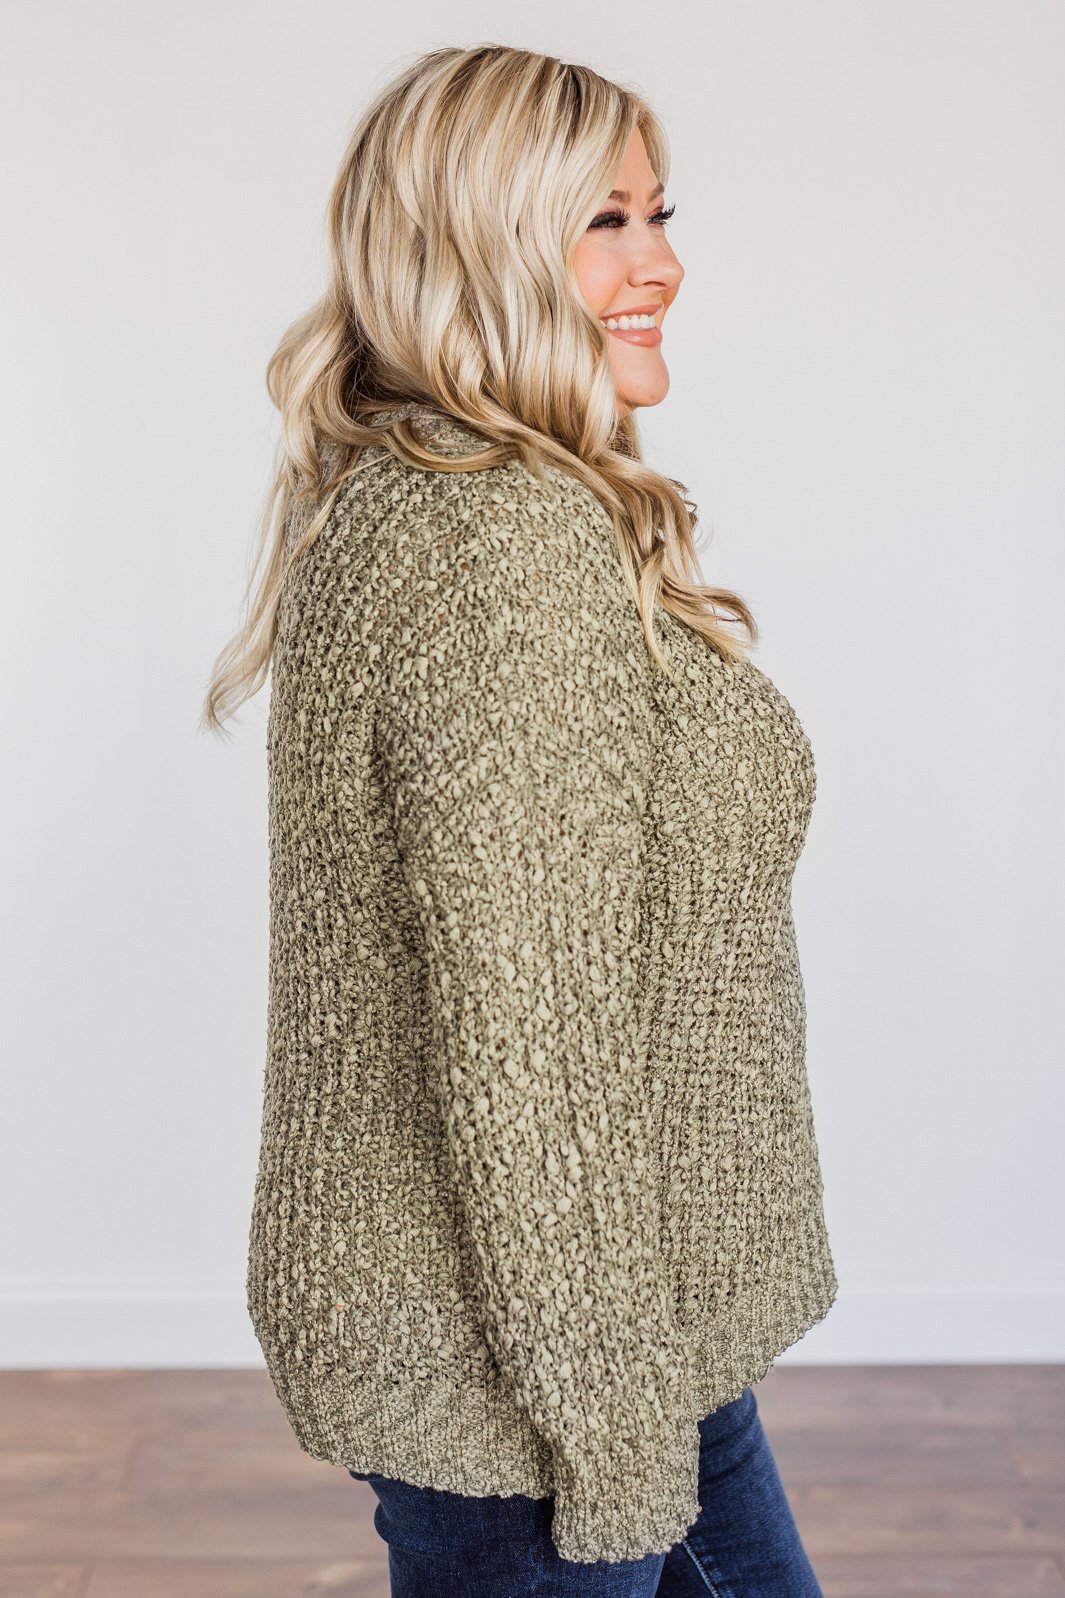 Can't Phase Me Knit Sweater- Olive